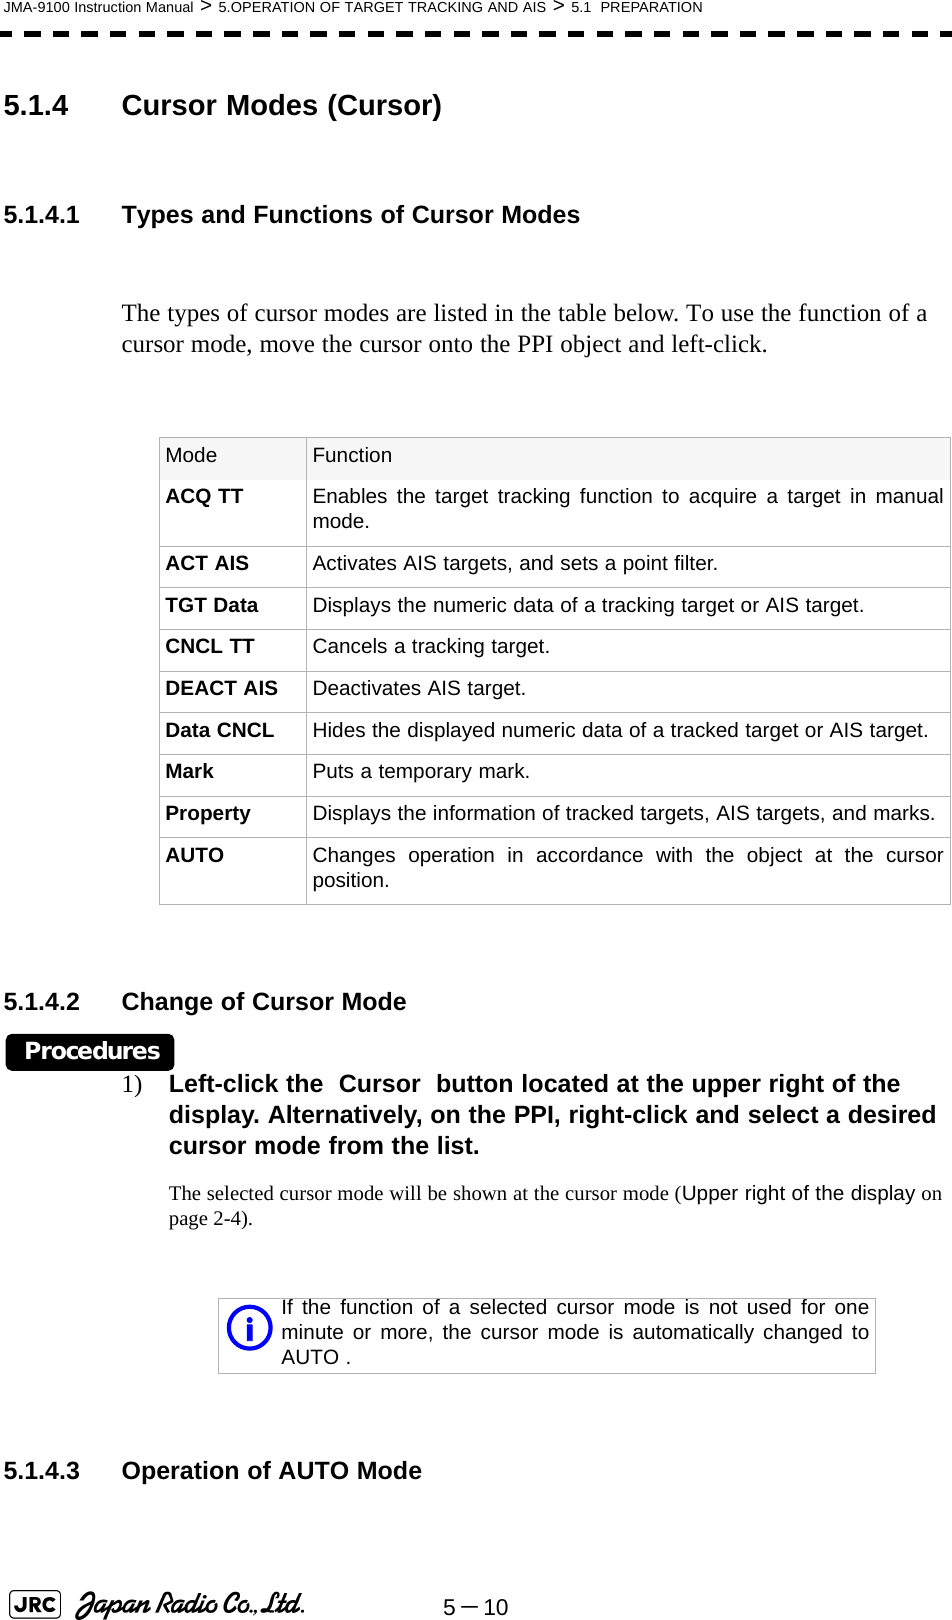 5－10JMA-9100 Instruction Manual &gt; 5.OPERATION OF TARGET TRACKING AND AIS &gt; 5.1  PREPARATION5.1.4 Cursor Modes (Cursor)5.1.4.1 Types and Functions of Cursor ModesThe types of cursor modes are listed in the table below. To use the function of a cursor mode, move the cursor onto the PPI object and left-click.5.1.4.2 Change of Cursor ModeProcedures1) Left-click the  Cursor  button located at the upper right of the display. Alternatively, on the PPI, right-click and select a desired cursor mode from the list.The selected cursor mode will be shown at the cursor mode (Upper right of the display on page 2-4).5.1.4.3 Operation of AUTO ModeMode FunctionACQ TT Enables the target tracking function to acquire a target in manualmode.ACT AIS Activates AIS targets, and sets a point filter.TGT Data Displays the numeric data of a tracking target or AIS target.CNCL TT Cancels a tracking target.DEACT AIS Deactivates AIS target.Data CNCL Hides the displayed numeric data of a tracked target or AIS target.Mark Puts a temporary mark.Property Displays the information of tracked targets, AIS targets, and marks.AUTO Changes operation in accordance with the object at the cursorposition.If the function of a selected cursor mode is not used for oneminute or more, the cursor mode is automatically changed toAUTO .i